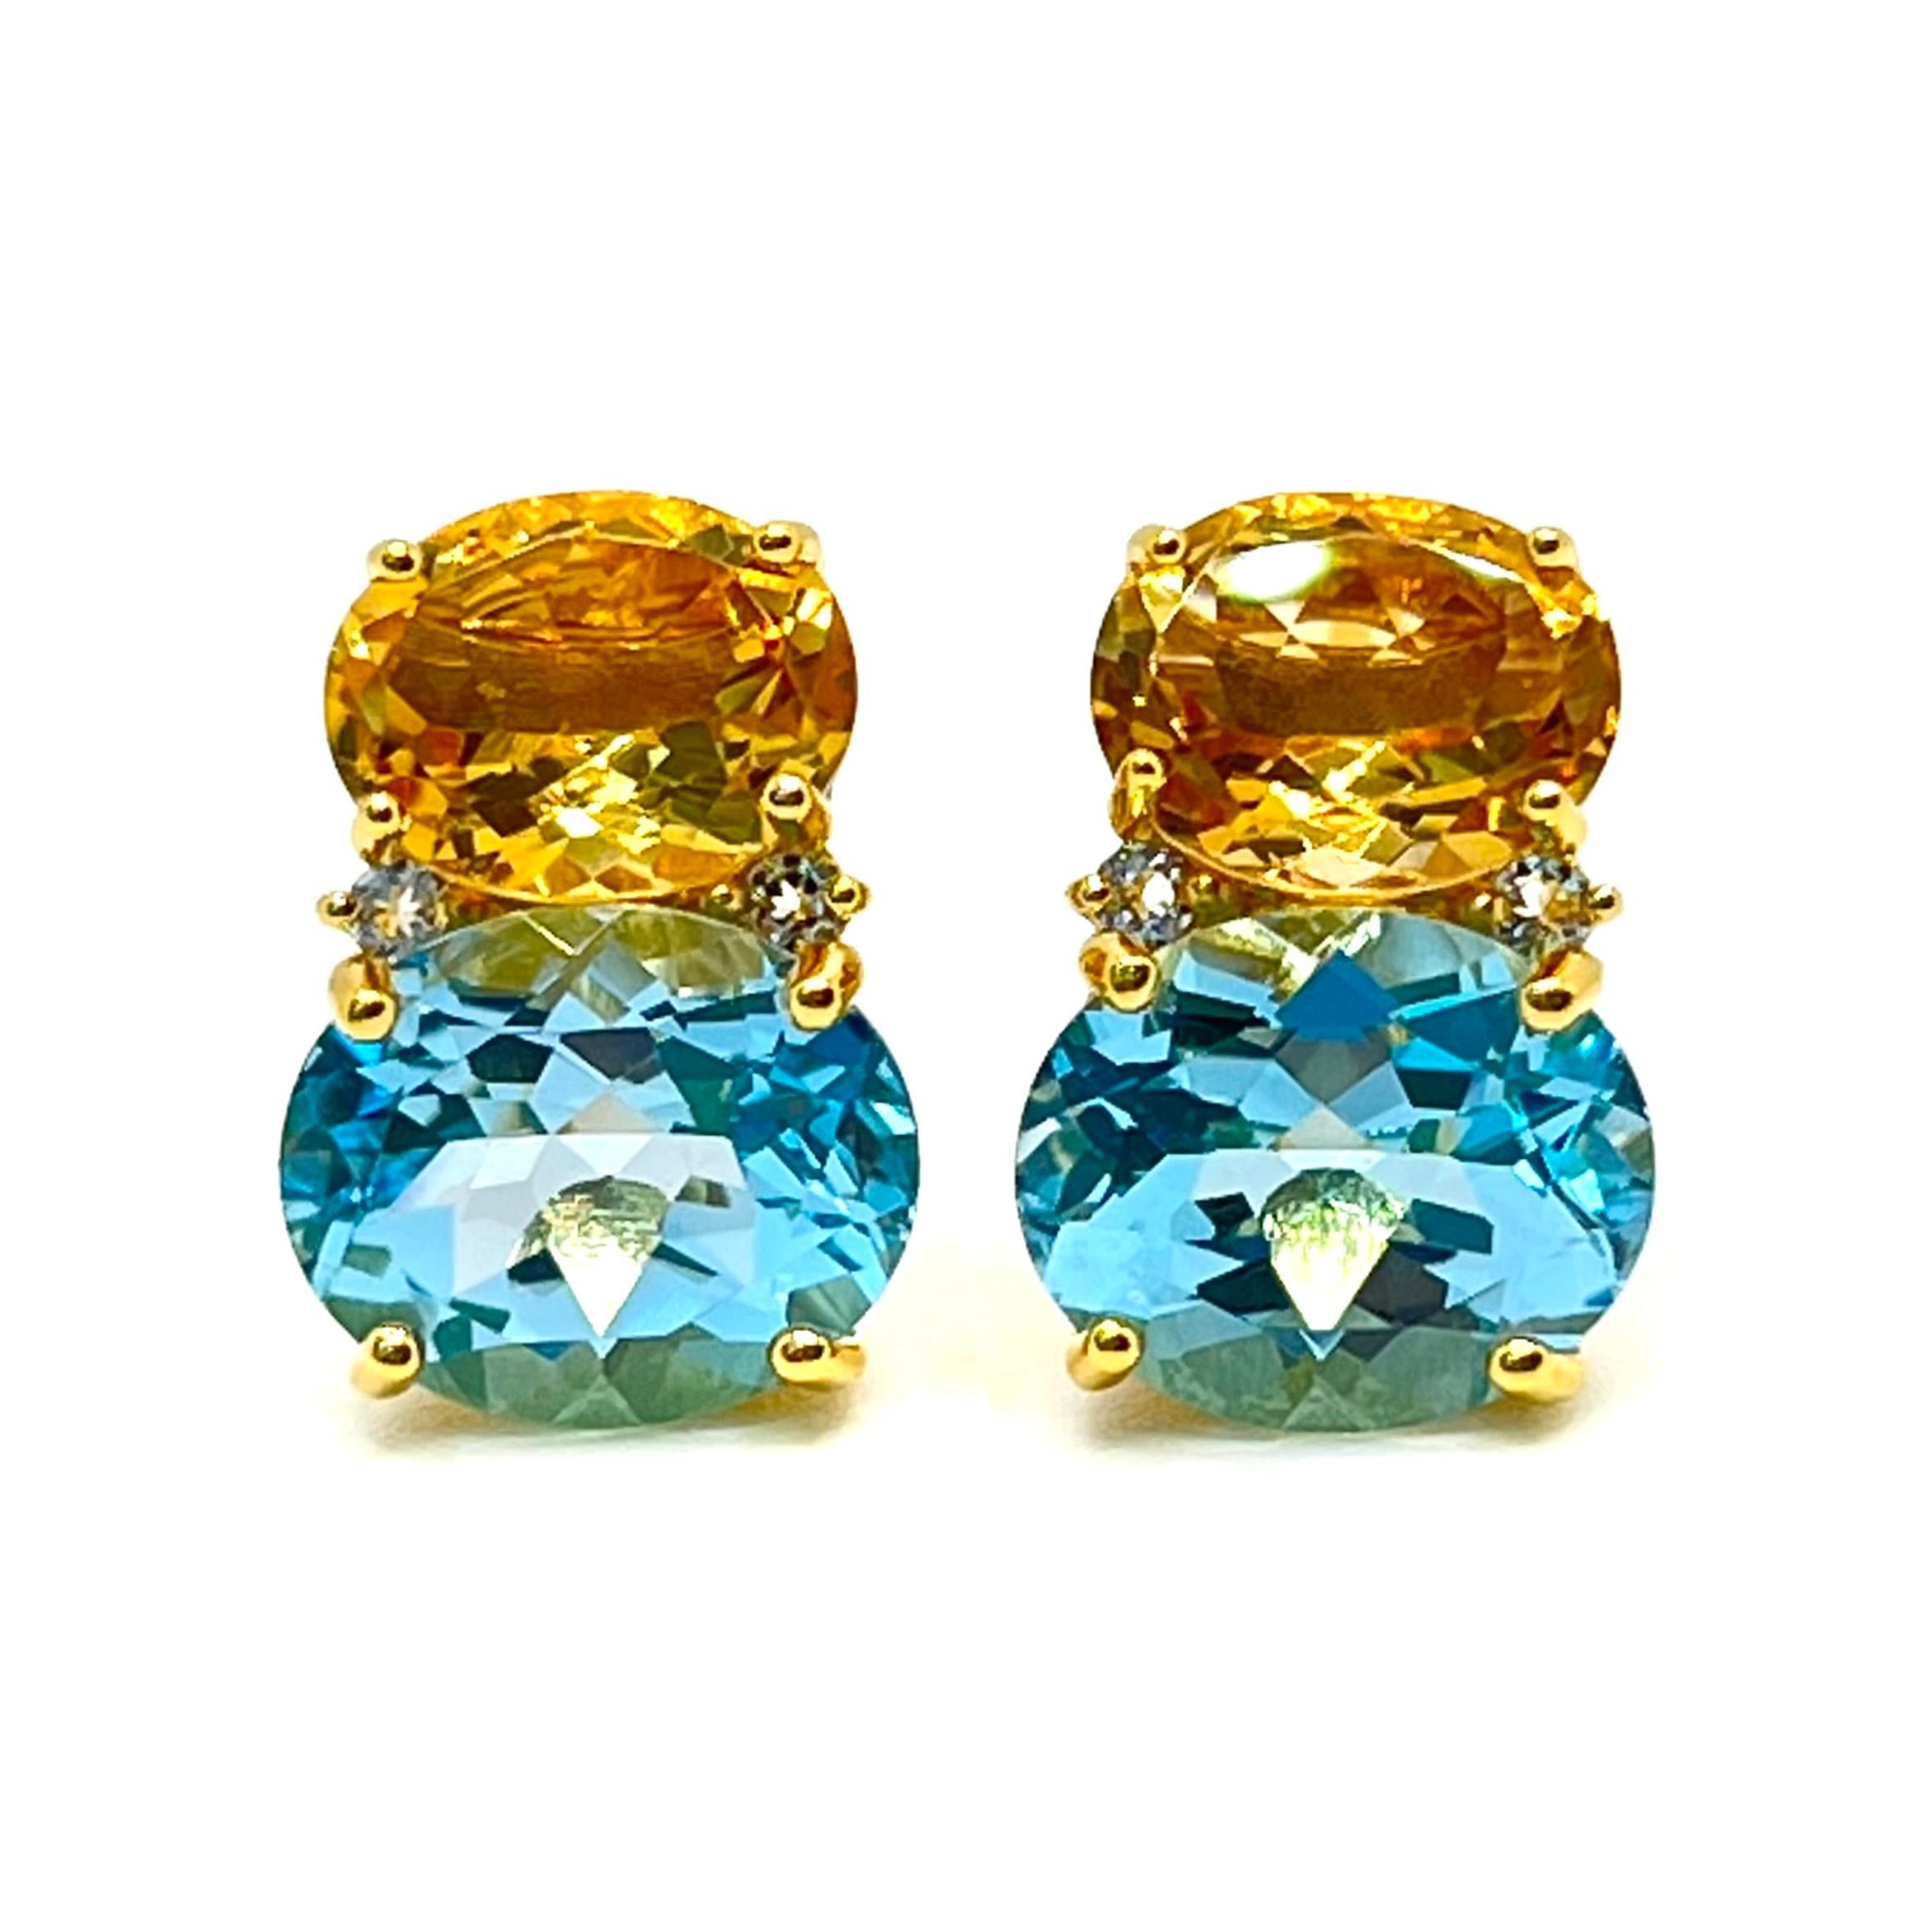 These stunning pair of earrings features a pair of genuine oval citrine, sky blue topaz, adorned with round white topaz on the side, handset in 18k yellow gold vermeil over sterling silver. The beautiful yellow/blue combination - they just look so